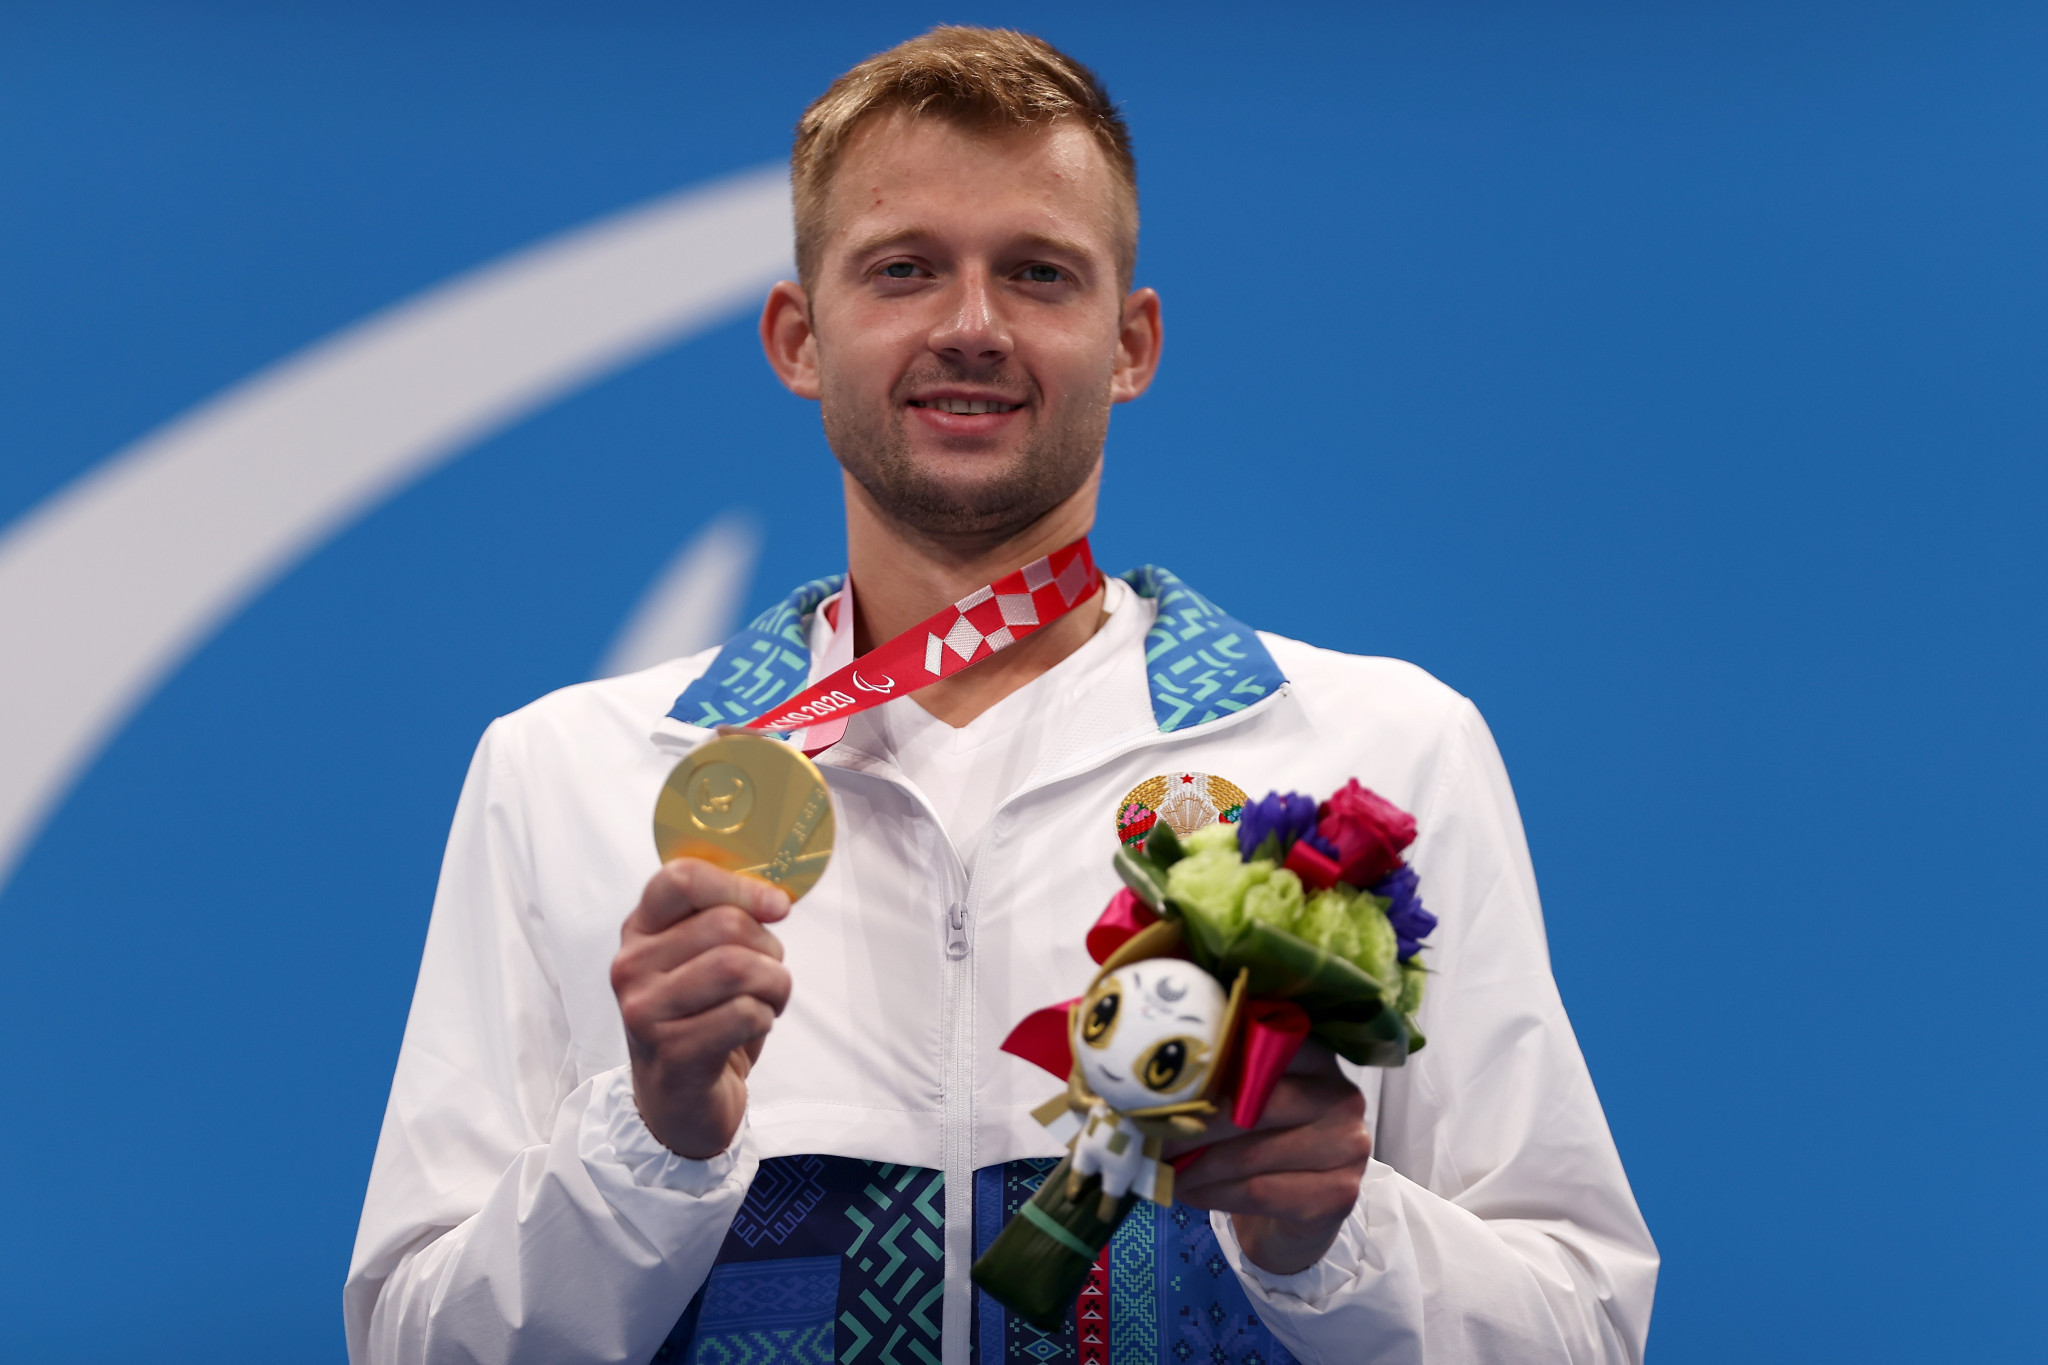 Belarus' Ihar Boki won his third gold medal of the Tokyo 2020 Paralympics on the third day of competition ©Getty Images